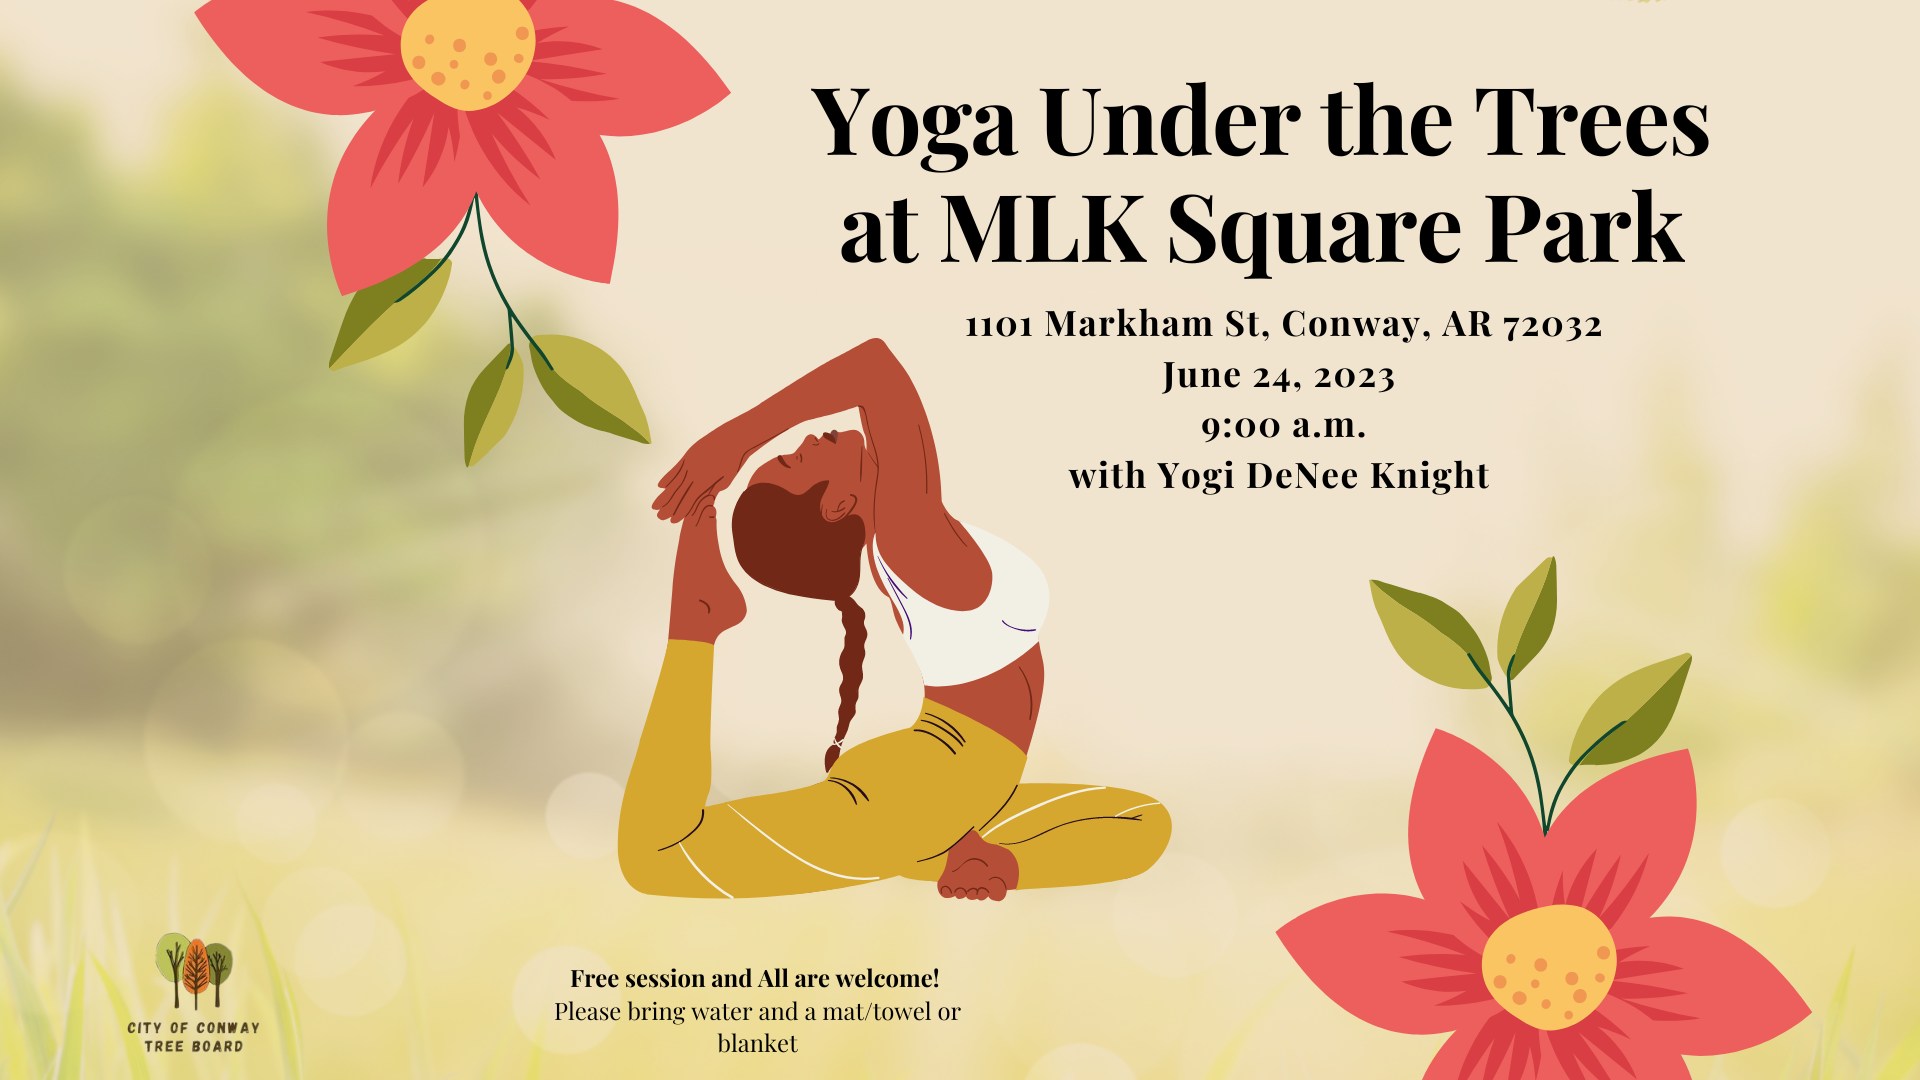 Yoga Under the Trees at MLK Square Park